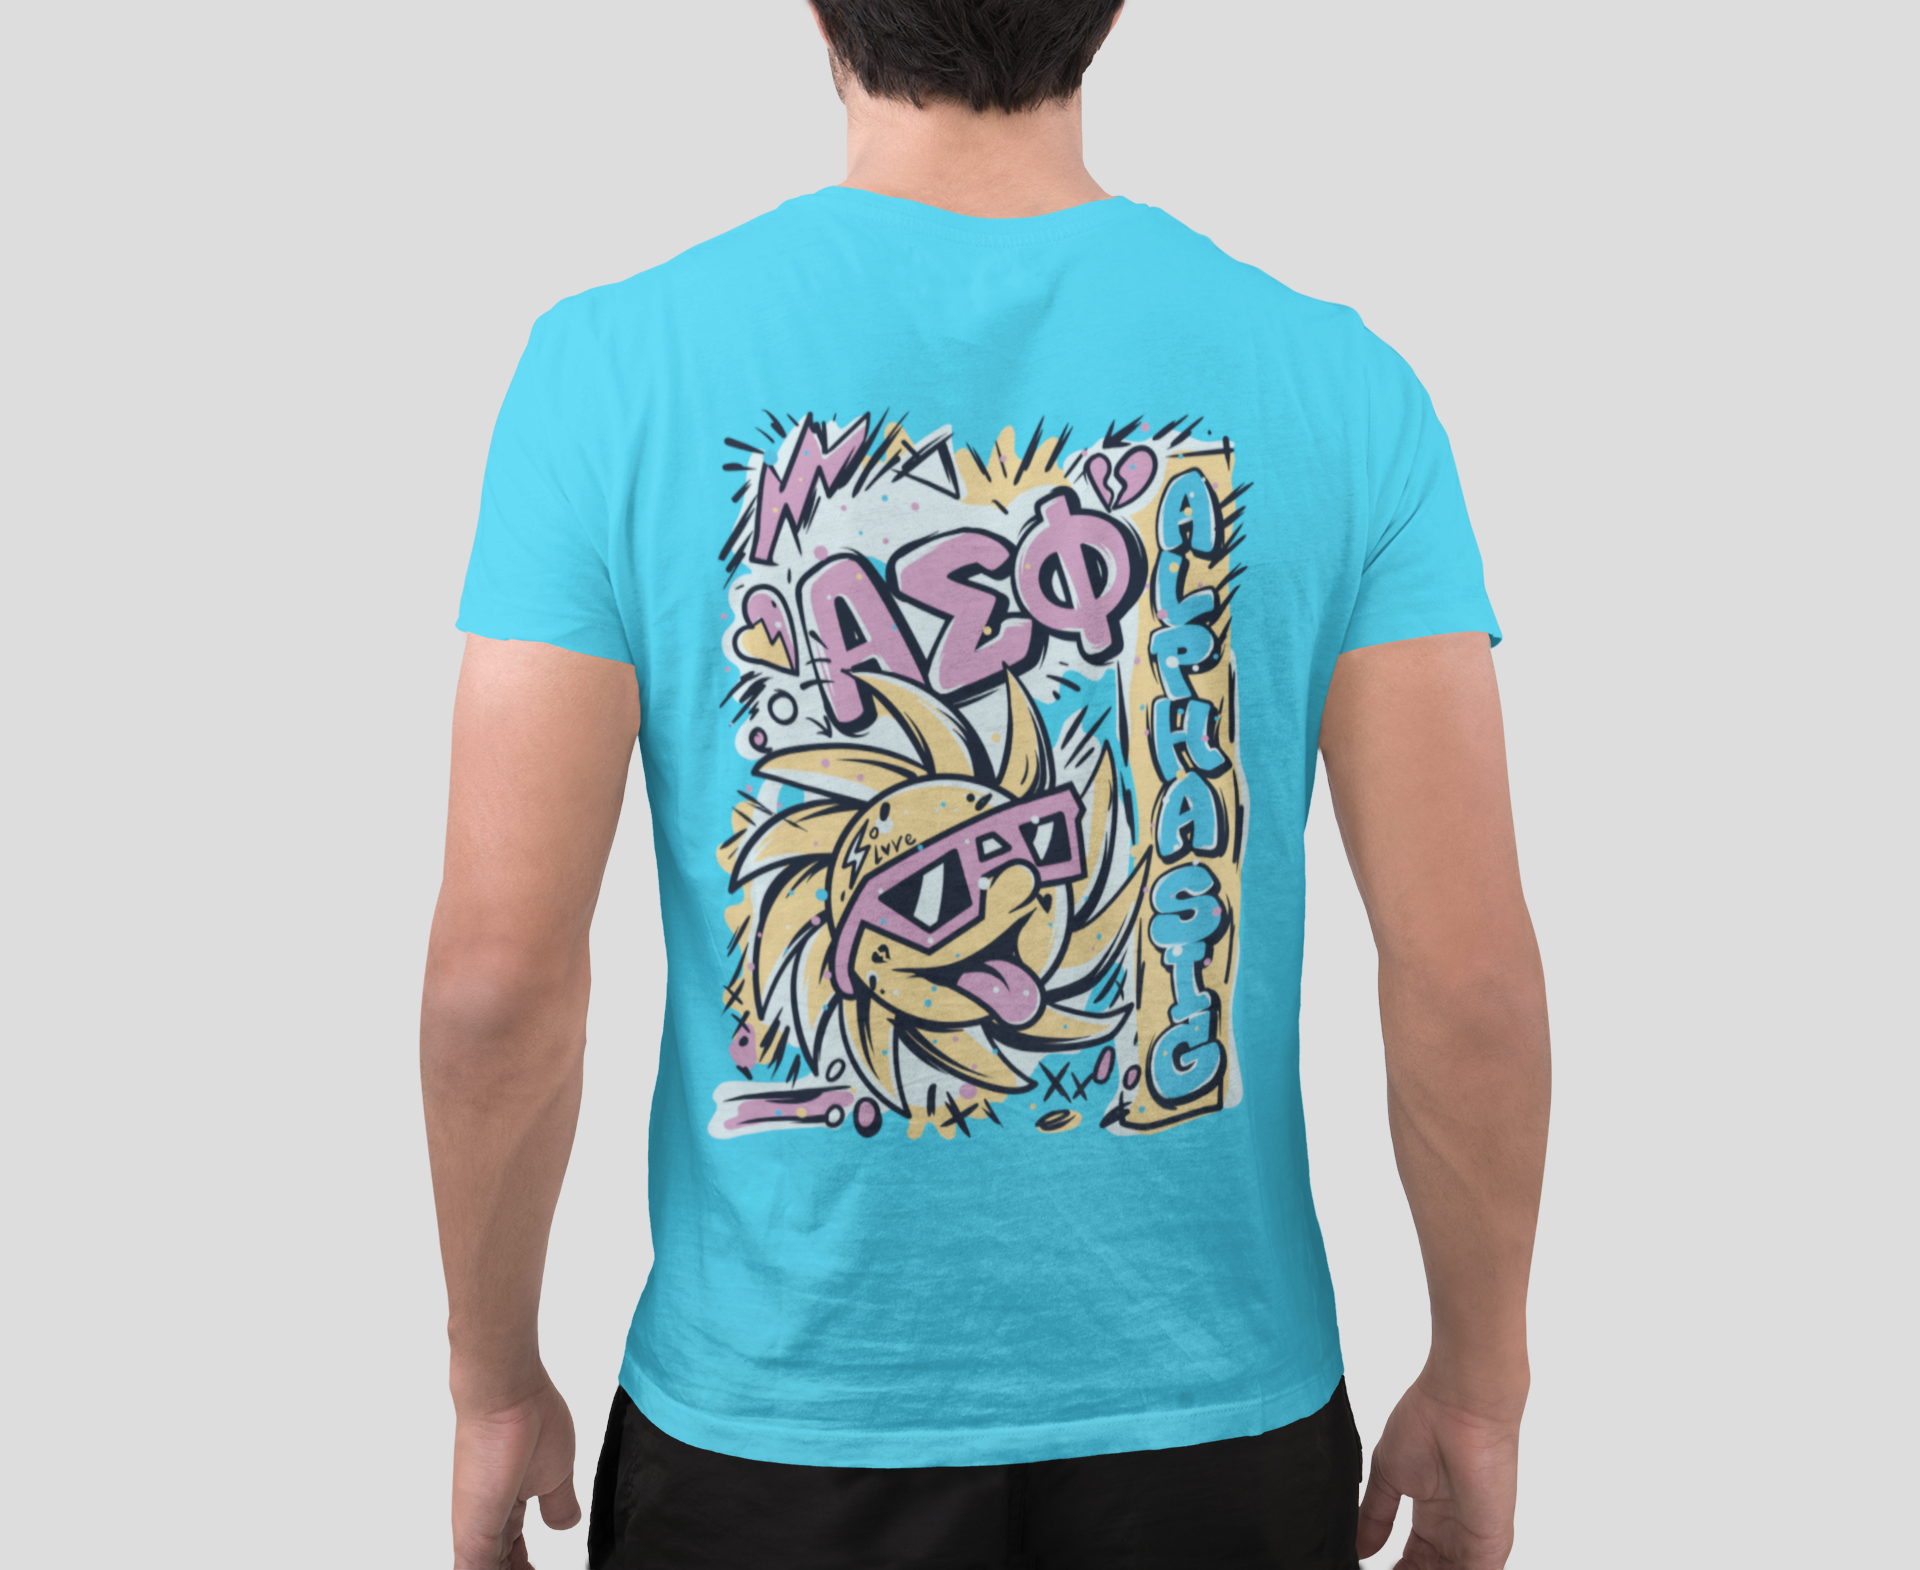 Alpha Sigma Phi Graphic T-Shirt | Fun in the Sun | Fraternity Shirt  Back model 